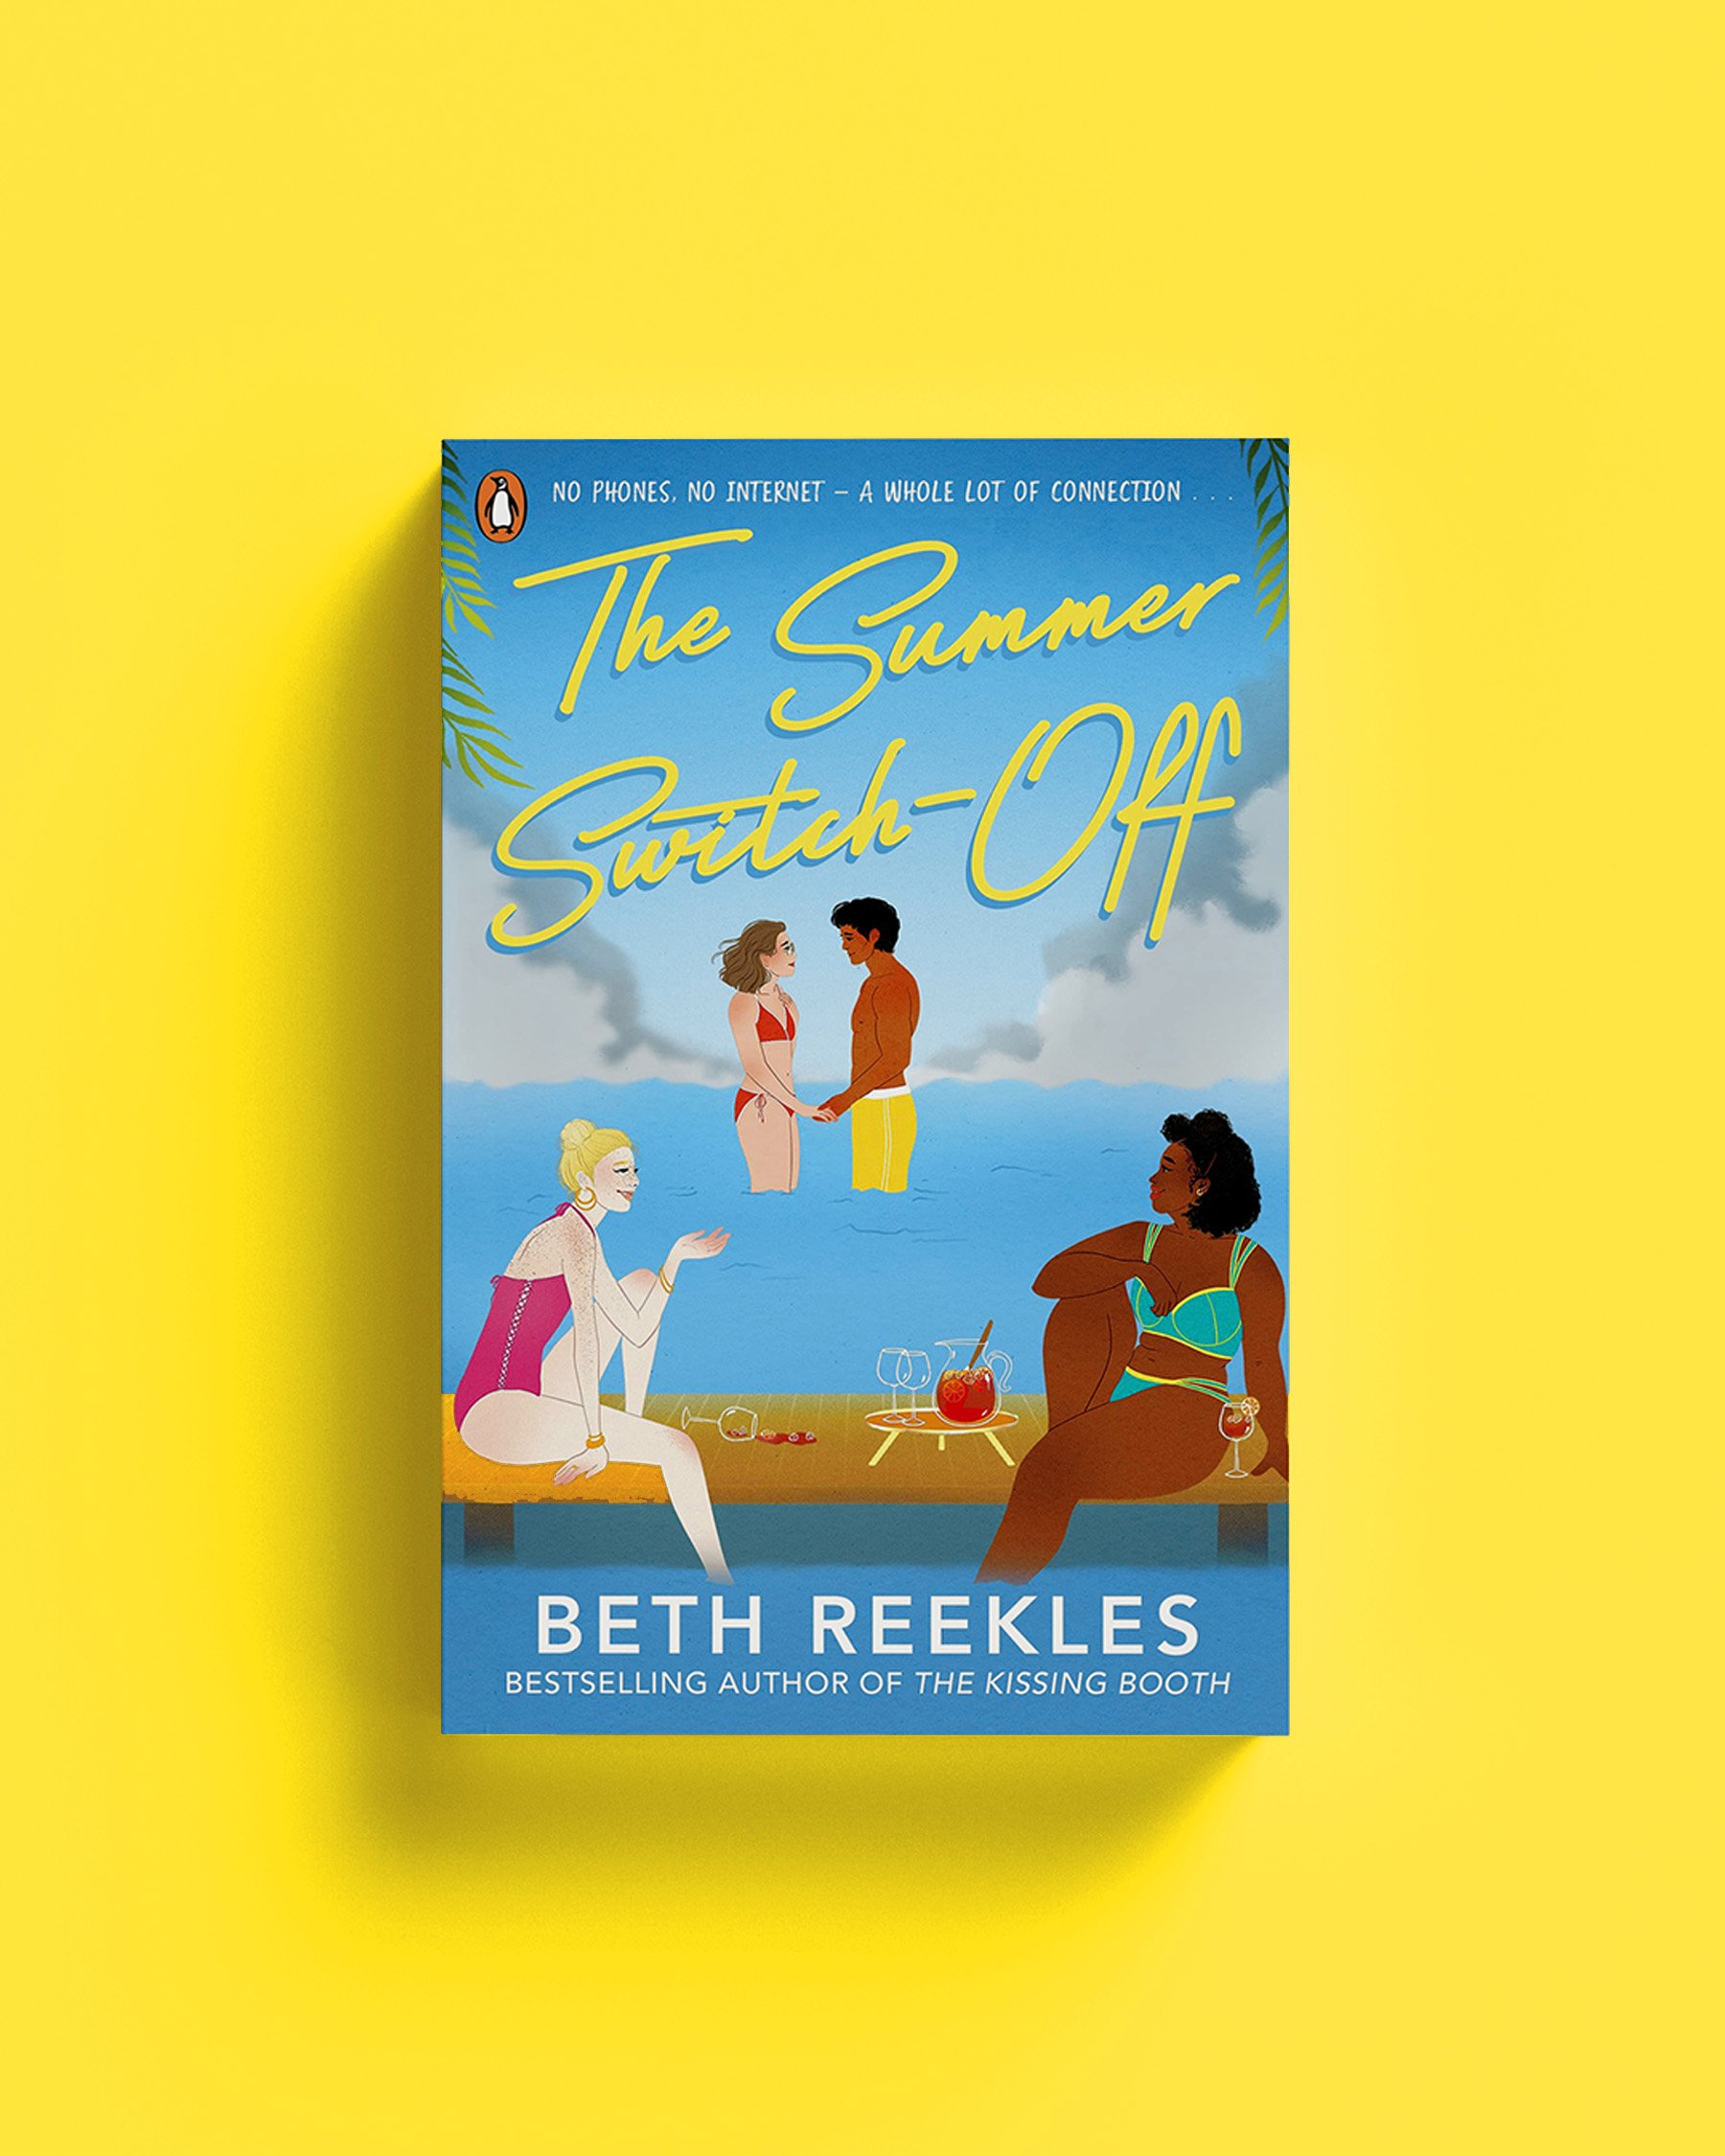 Cover for "The summer switch off" by Beth Reekles